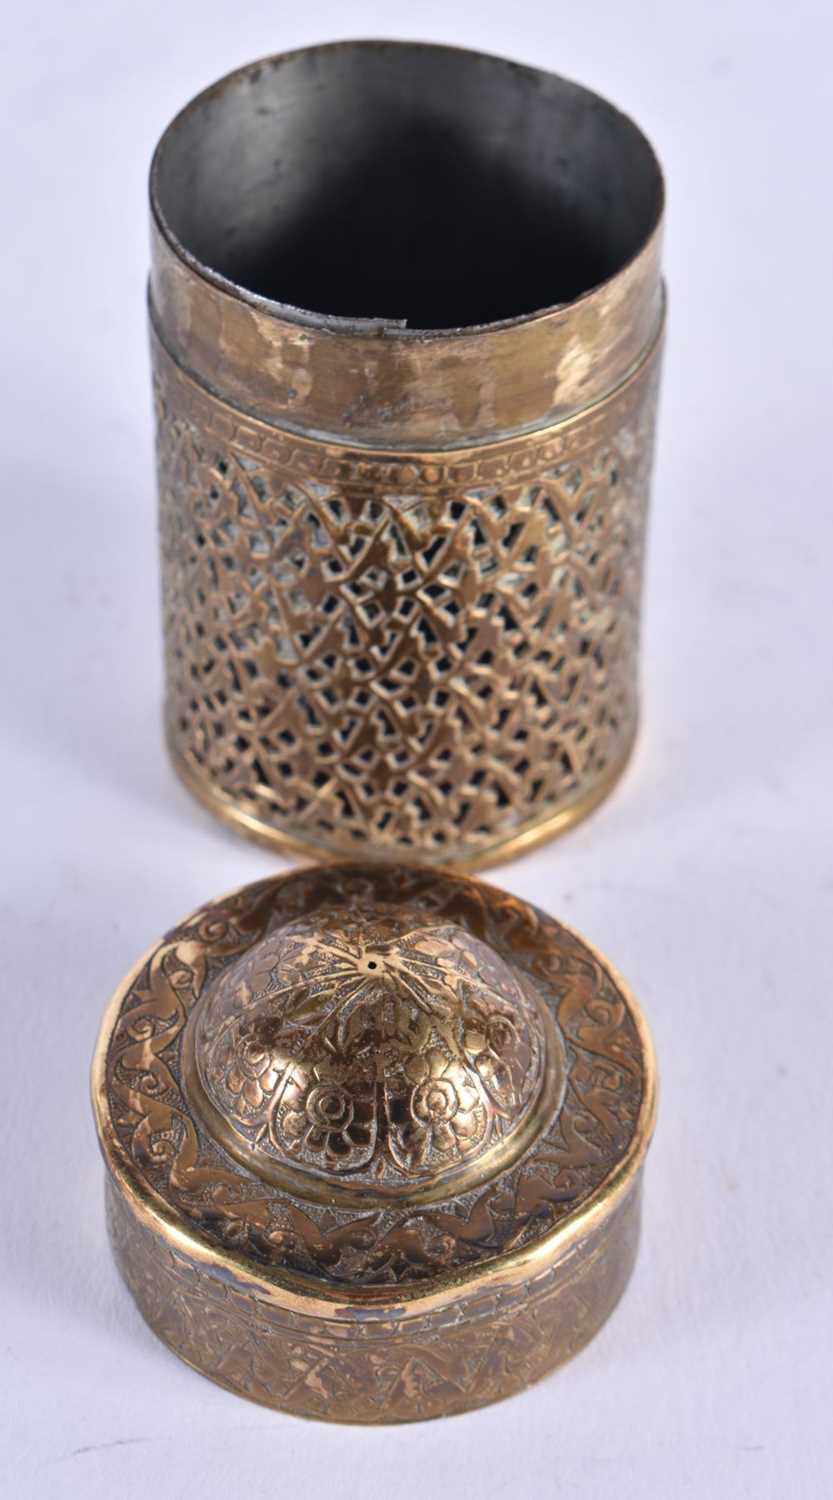 AN ANTIQUE ISLAMIC BRASS BOX AND COVER. 65 grams. 7.75 cm x 4.25cm. - Image 2 of 3